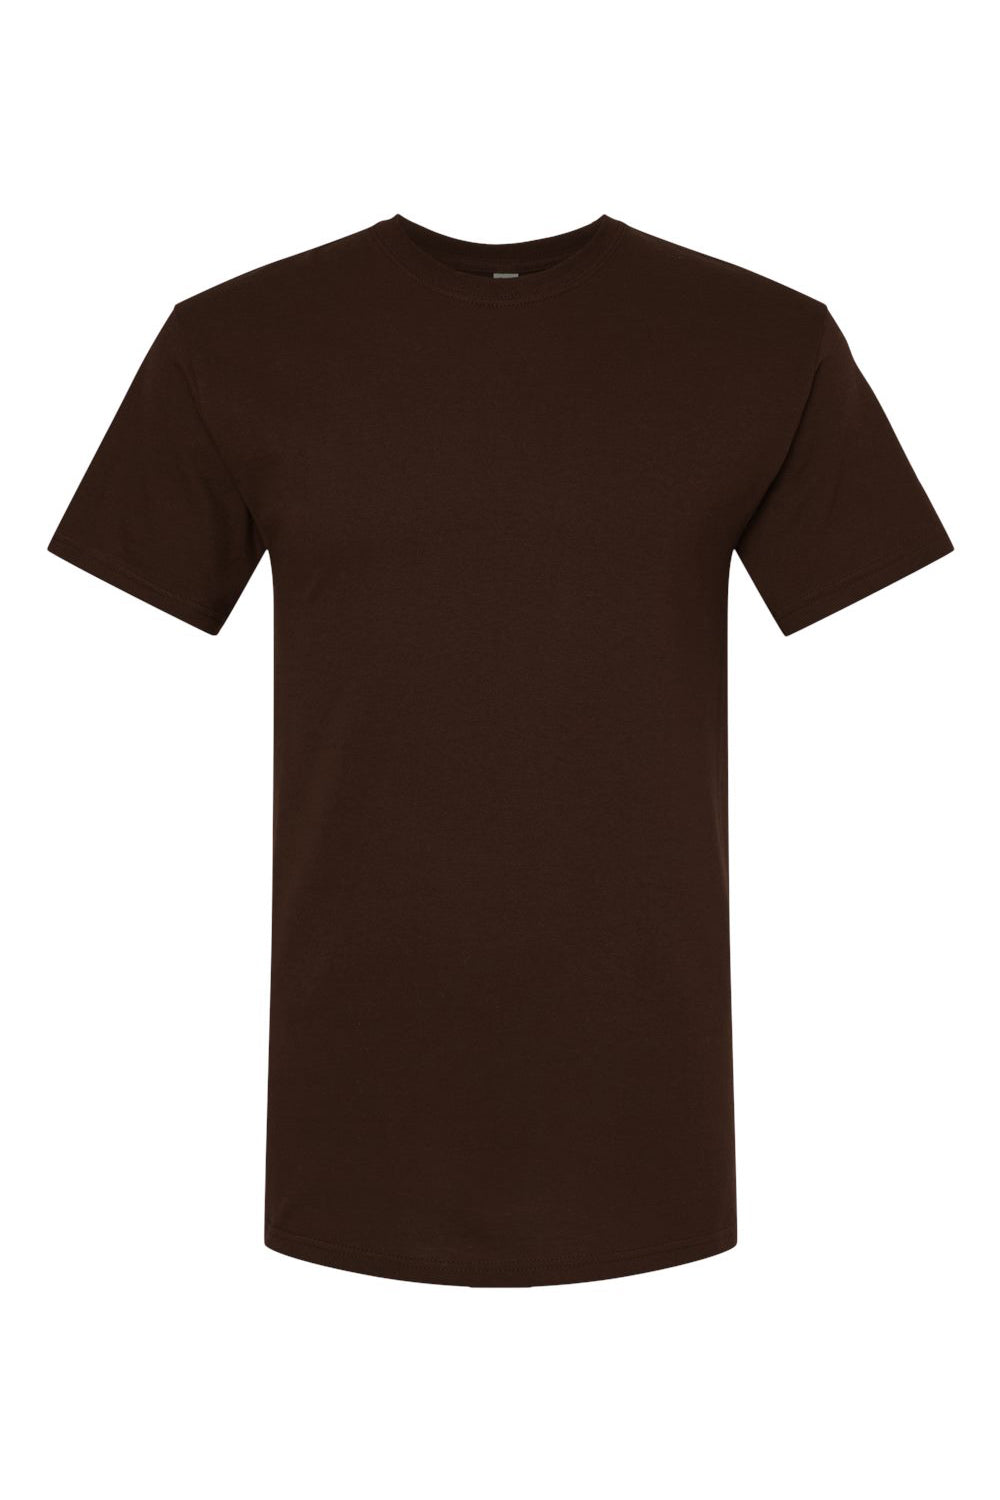 M&O 4800 Mens Gold Soft Touch Short Sleeve Crewneck T-Shirt Chocolate Brown Flat Front